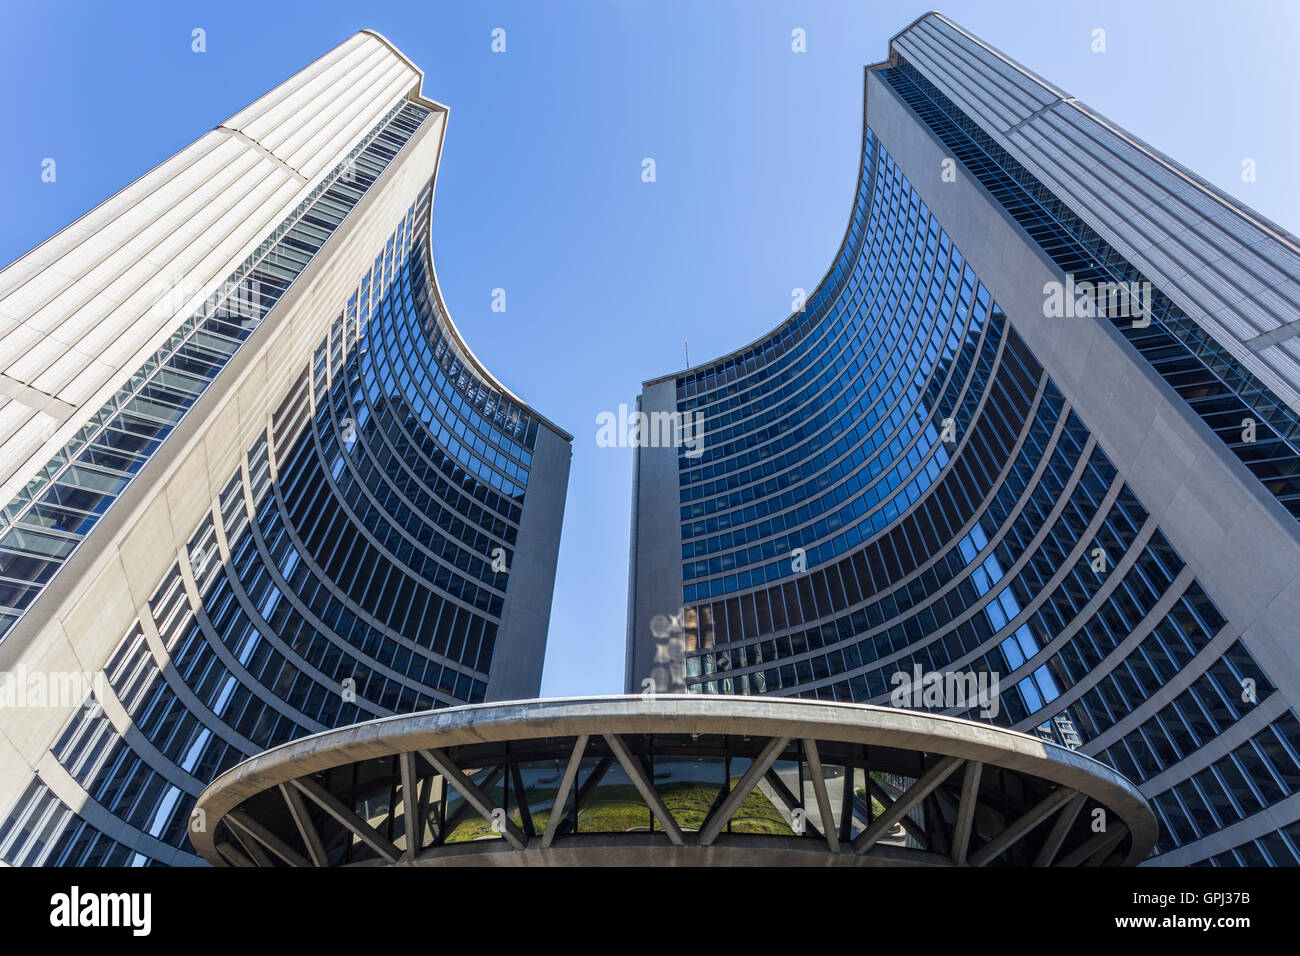 Toronto City Hall close up, taken from under the dome in Toronto, Ontario. Stock Photo